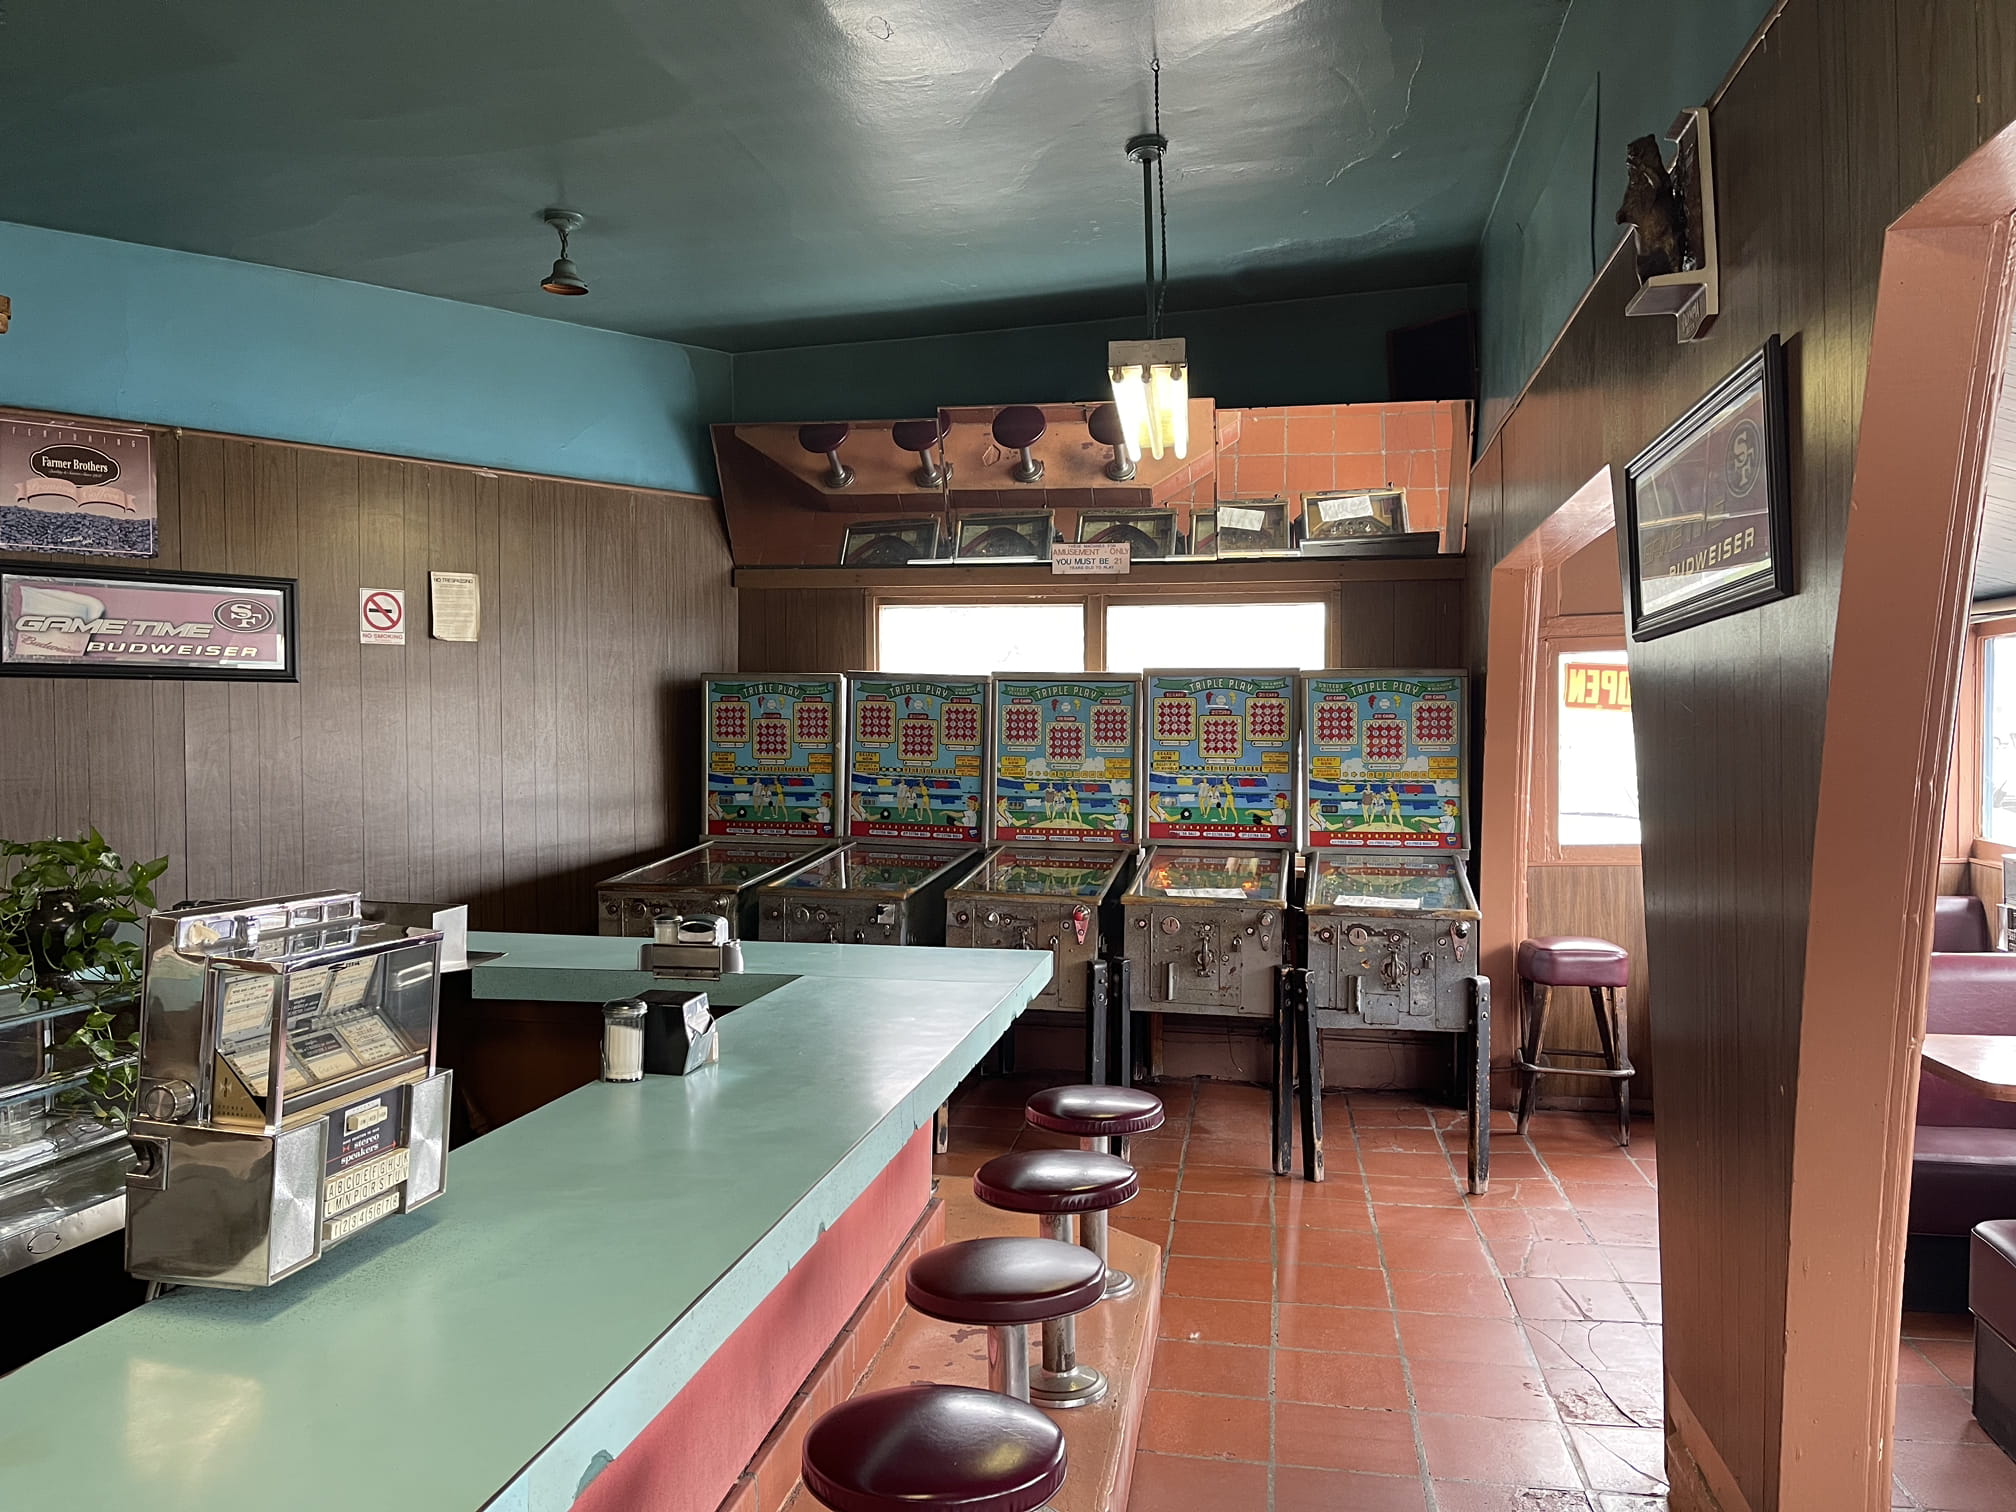 Interior of silver crest donut and coffee shop restaurant and bar